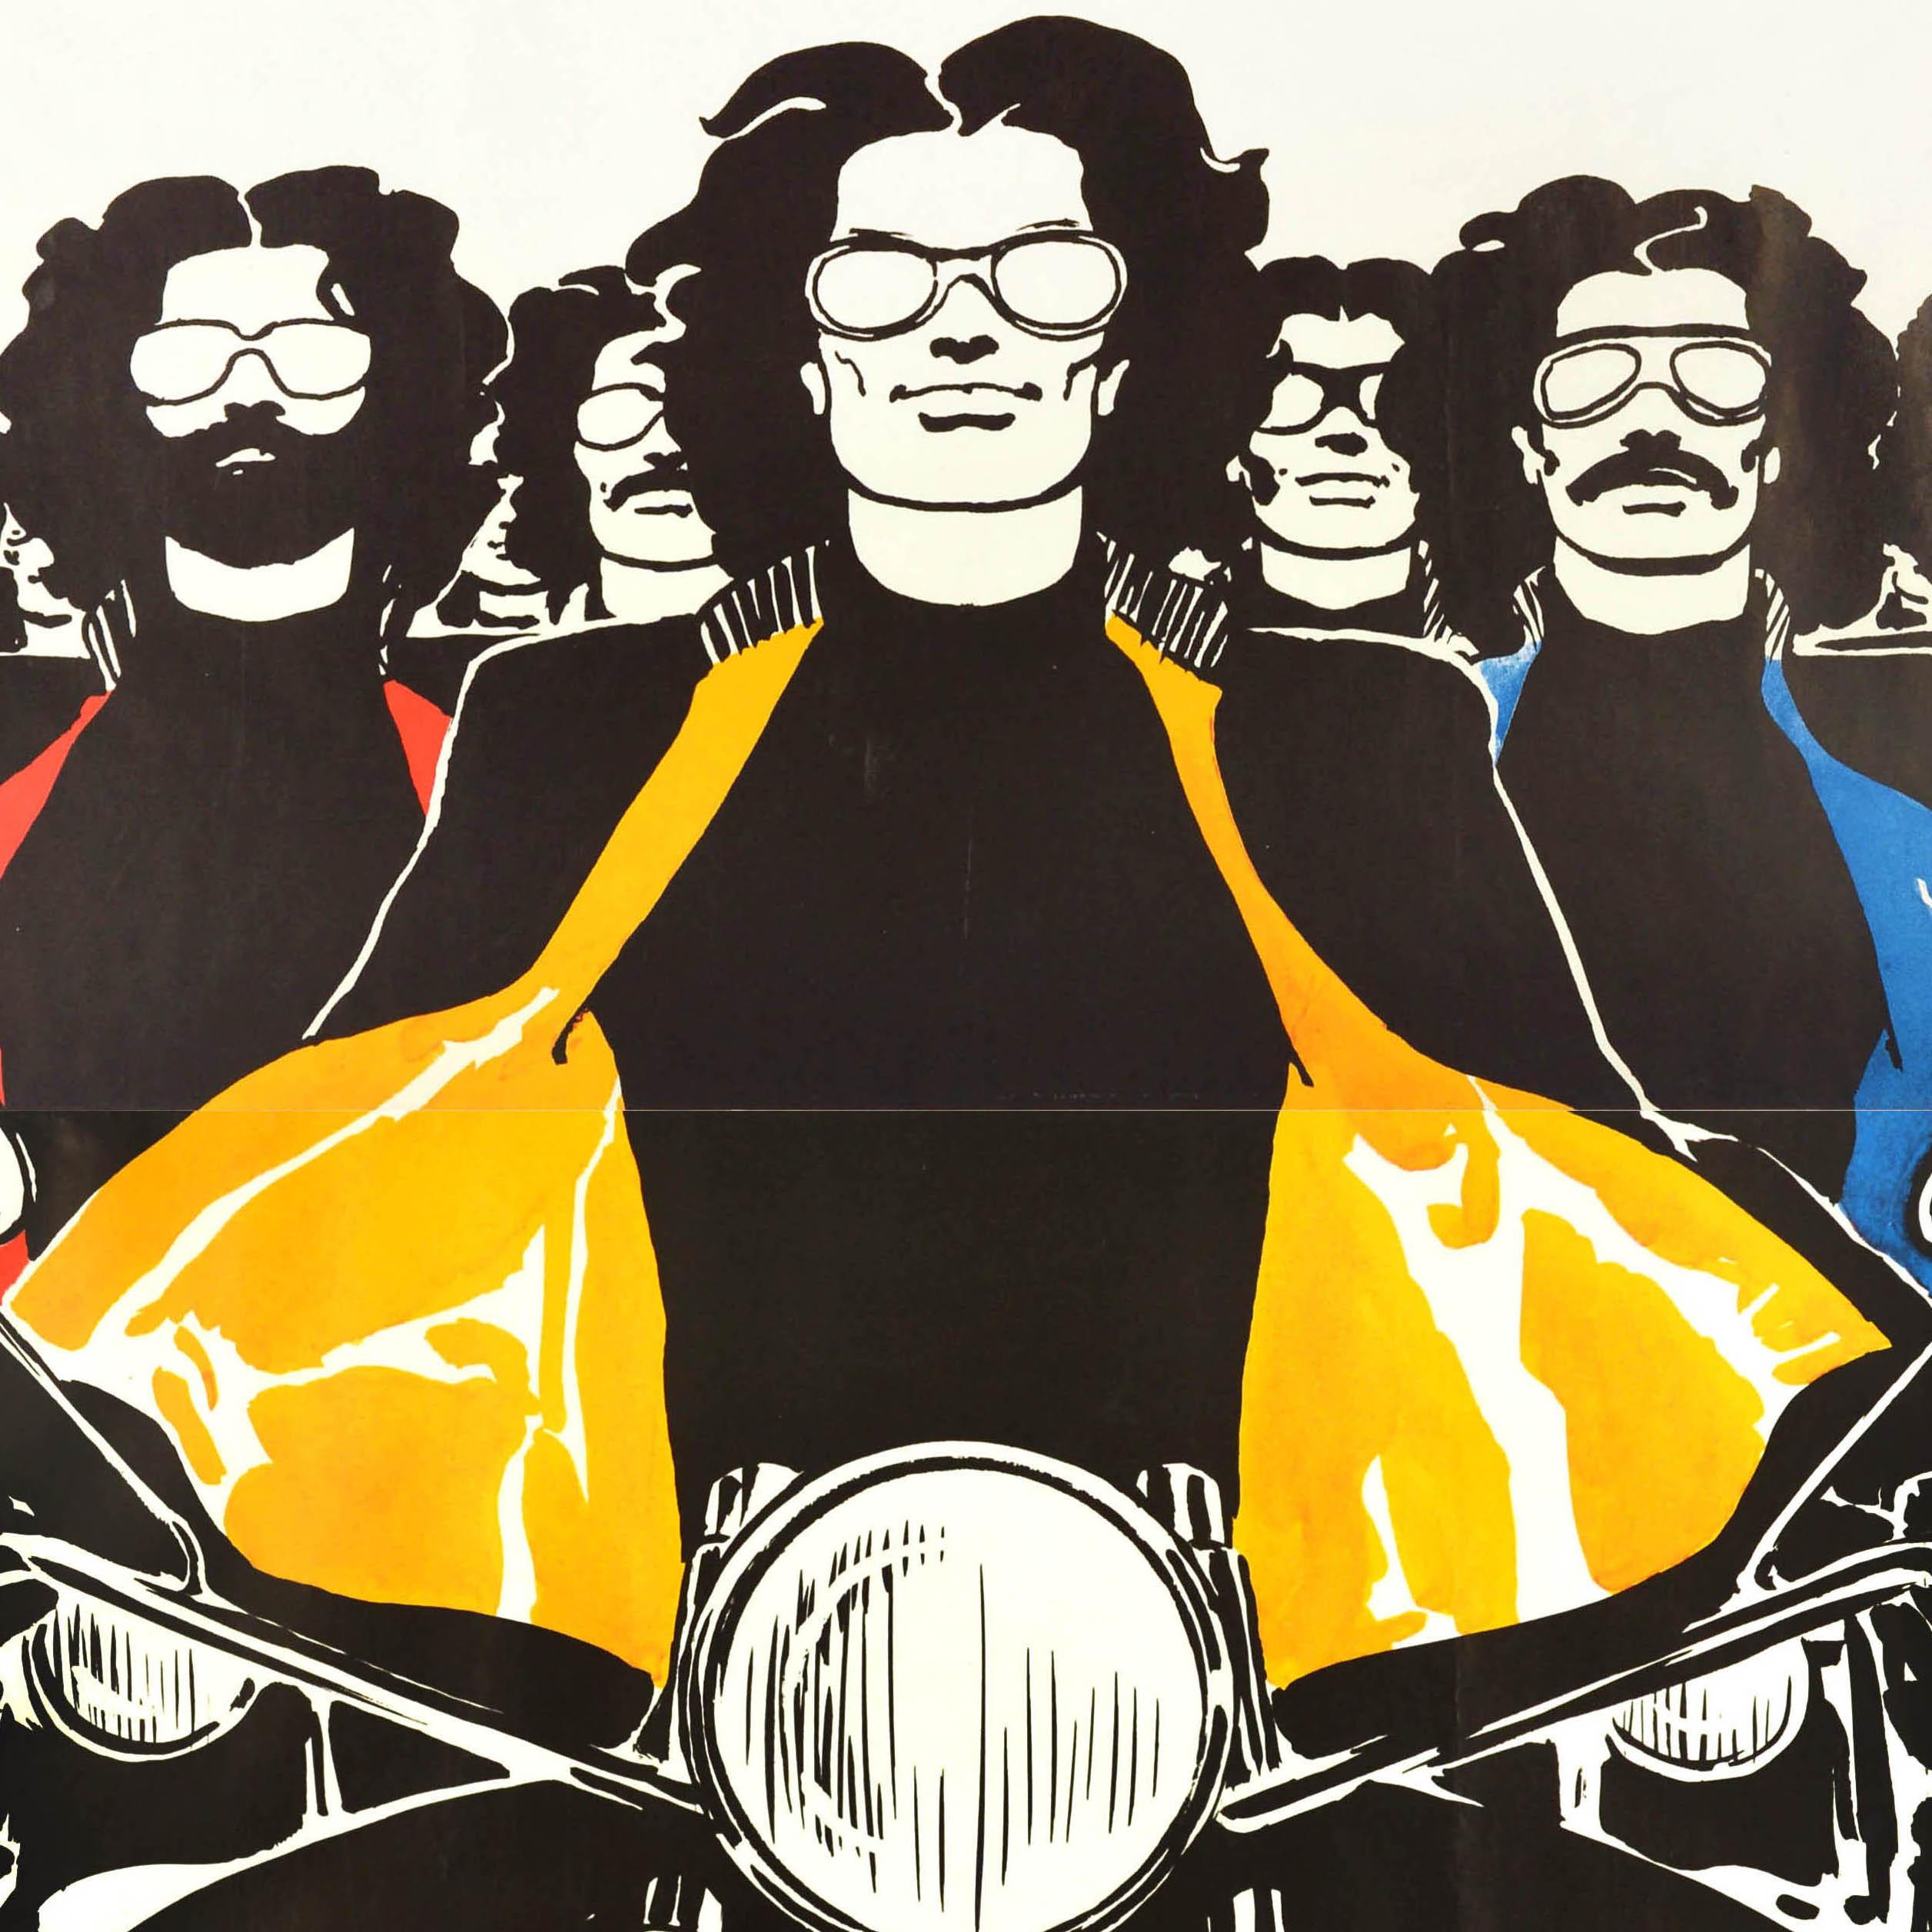 Original vintage fashion advertising poster by the notable graphic artist Rene Gruau (Renato de Zavagli; 1909-2004) for the Bemberg textile company featuring a black and white image of a group of men riding motorcycles towards the viewer with the